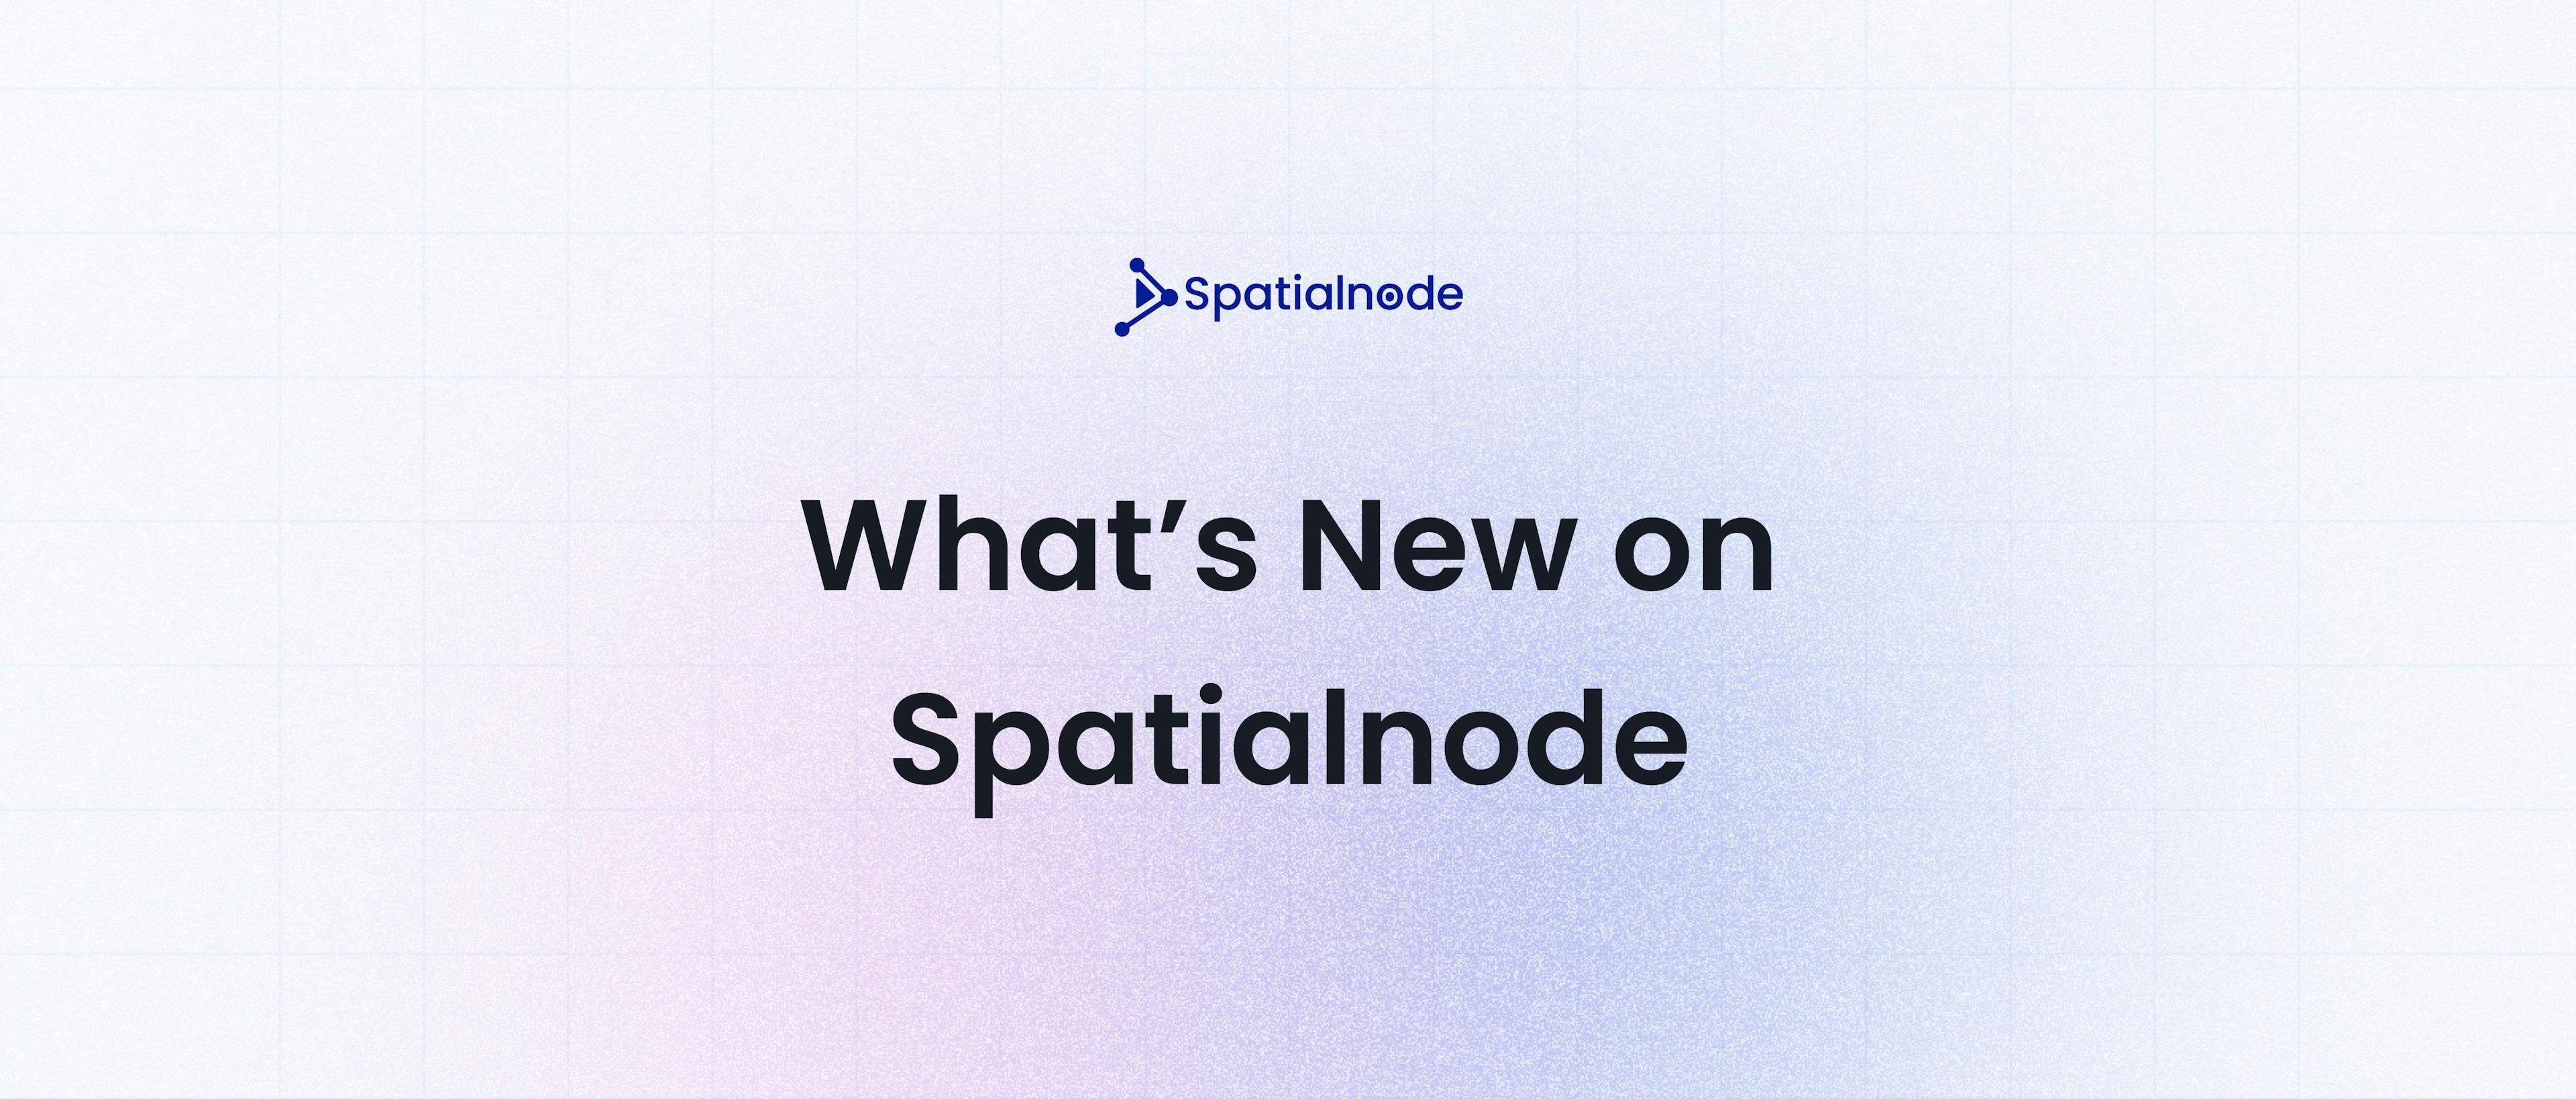 Spatialnode Release: Article series, improved search and more